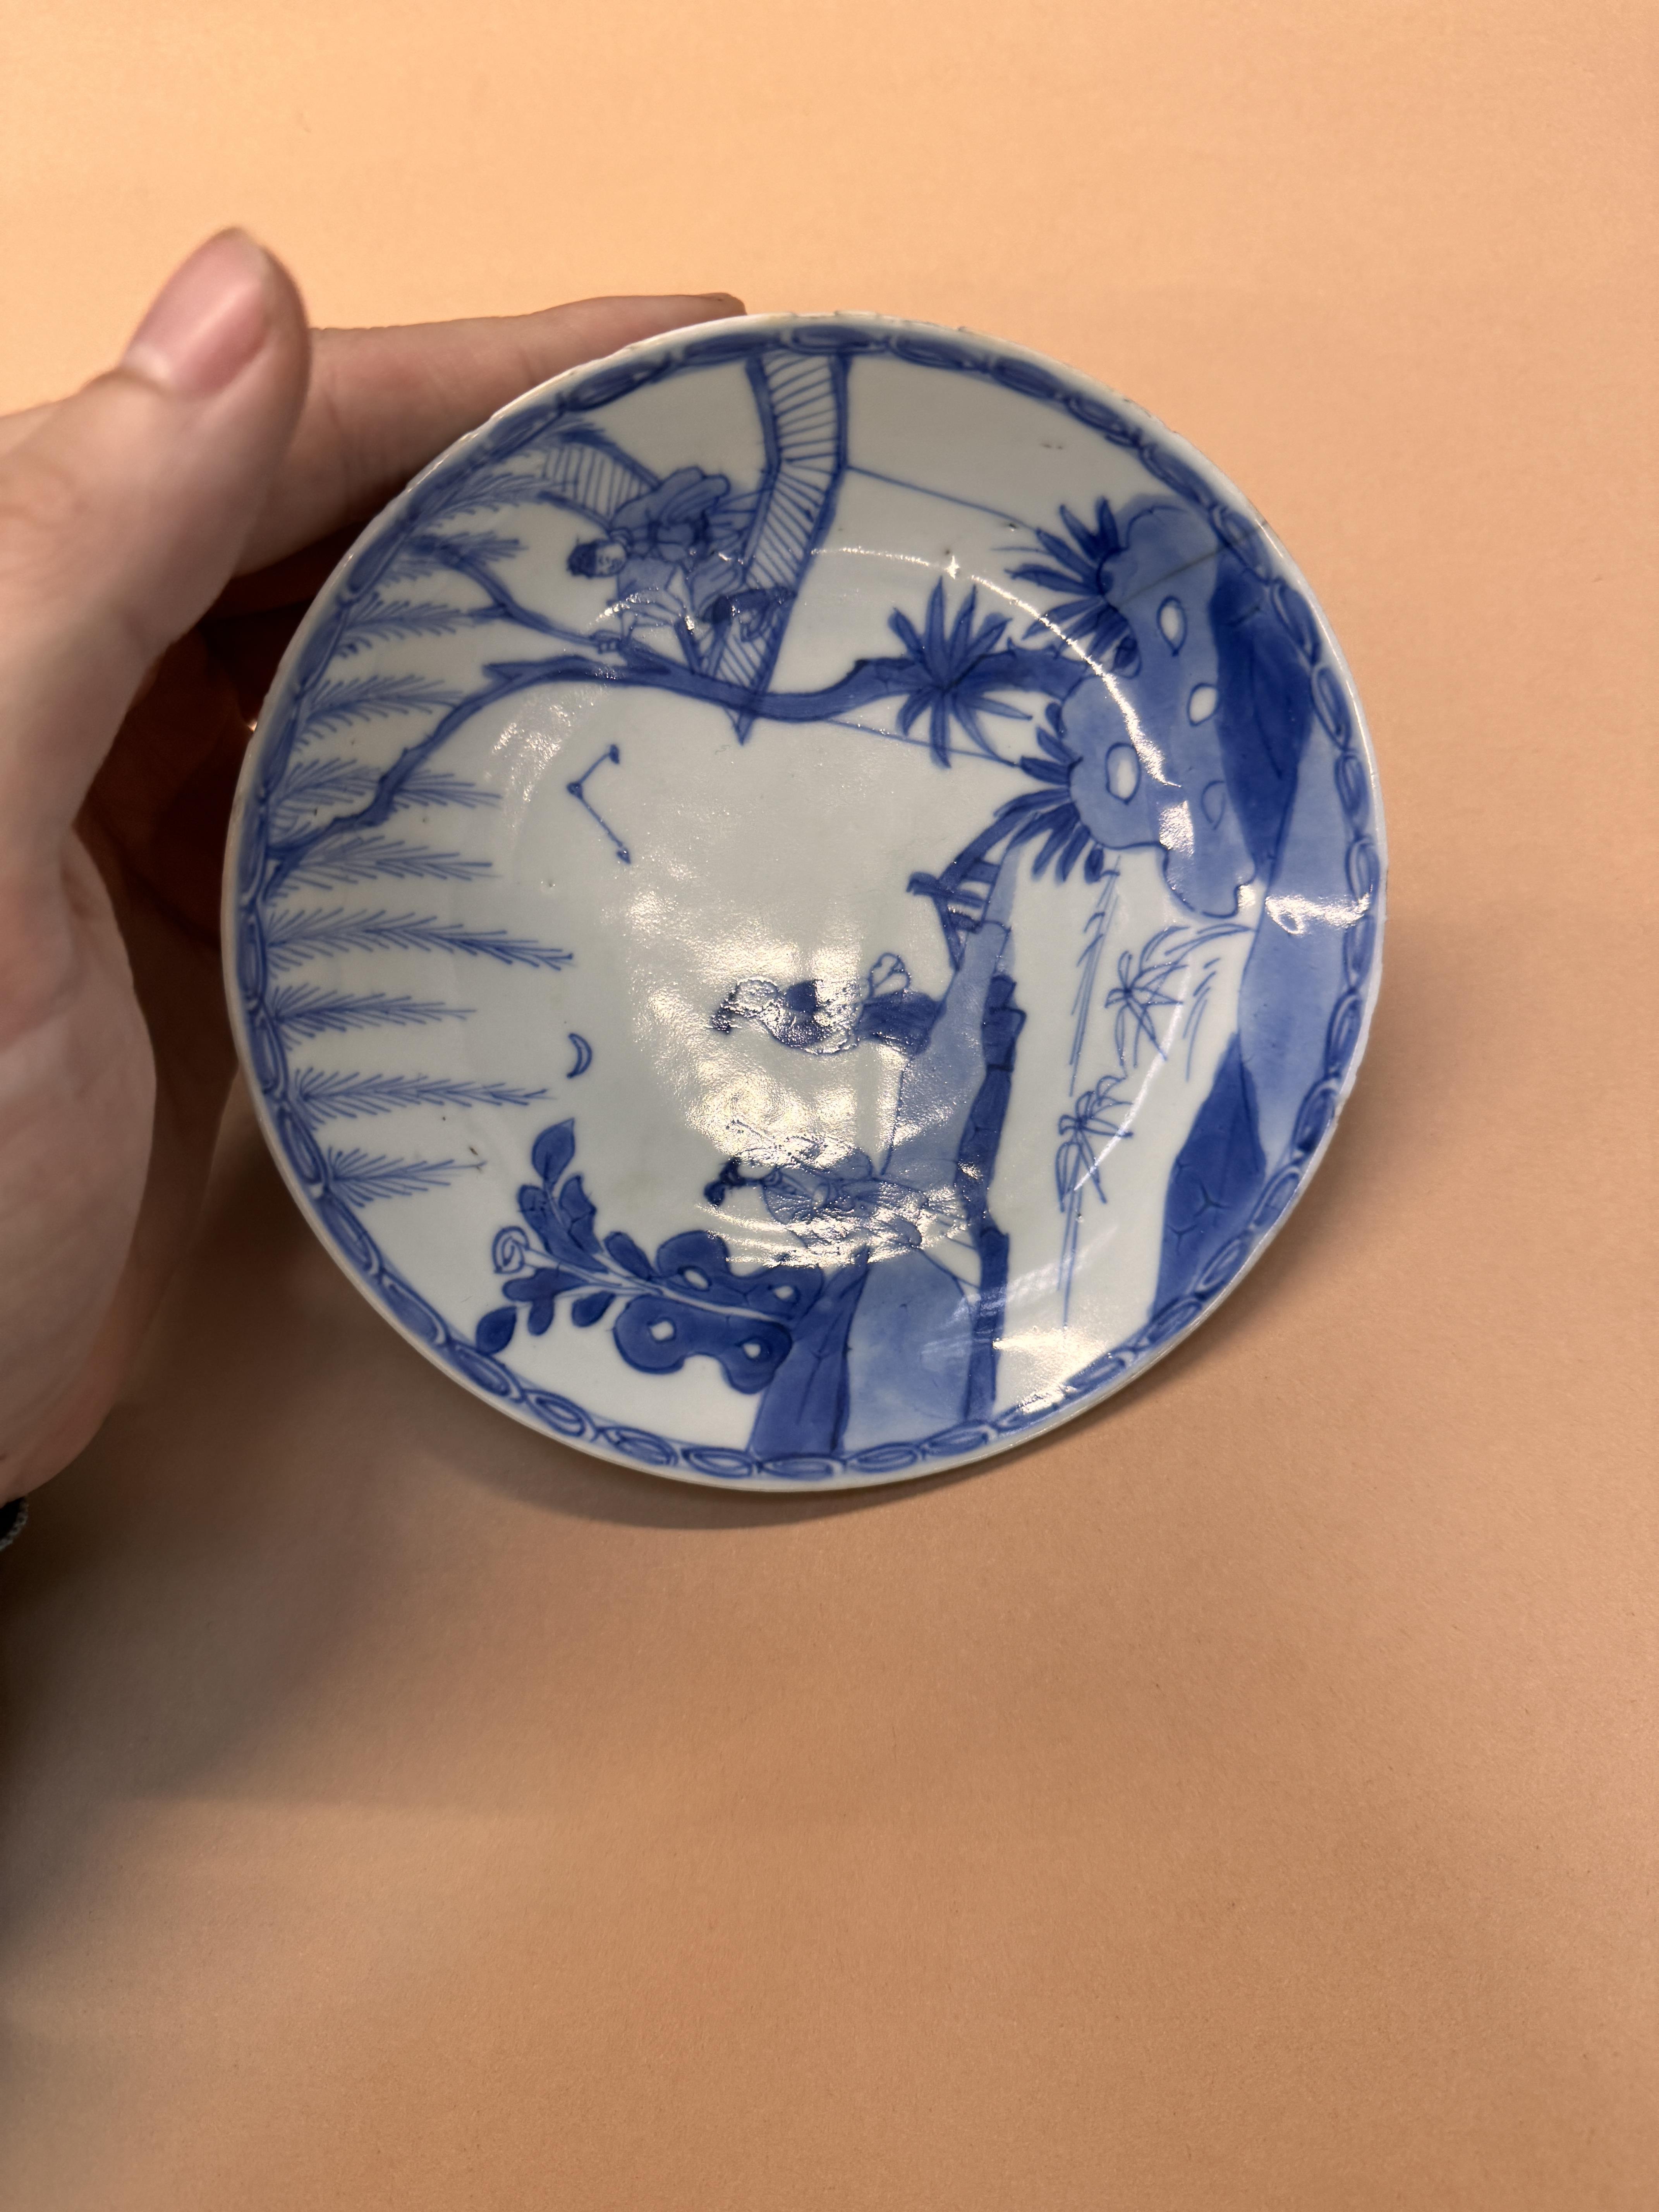 A CHINESE BLUE AND WHITE 'ROMANCE OF THE WESTERN CHAMBER' DISH 清康熙 青花繪西廂記人物故事圖盤 - Image 8 of 9